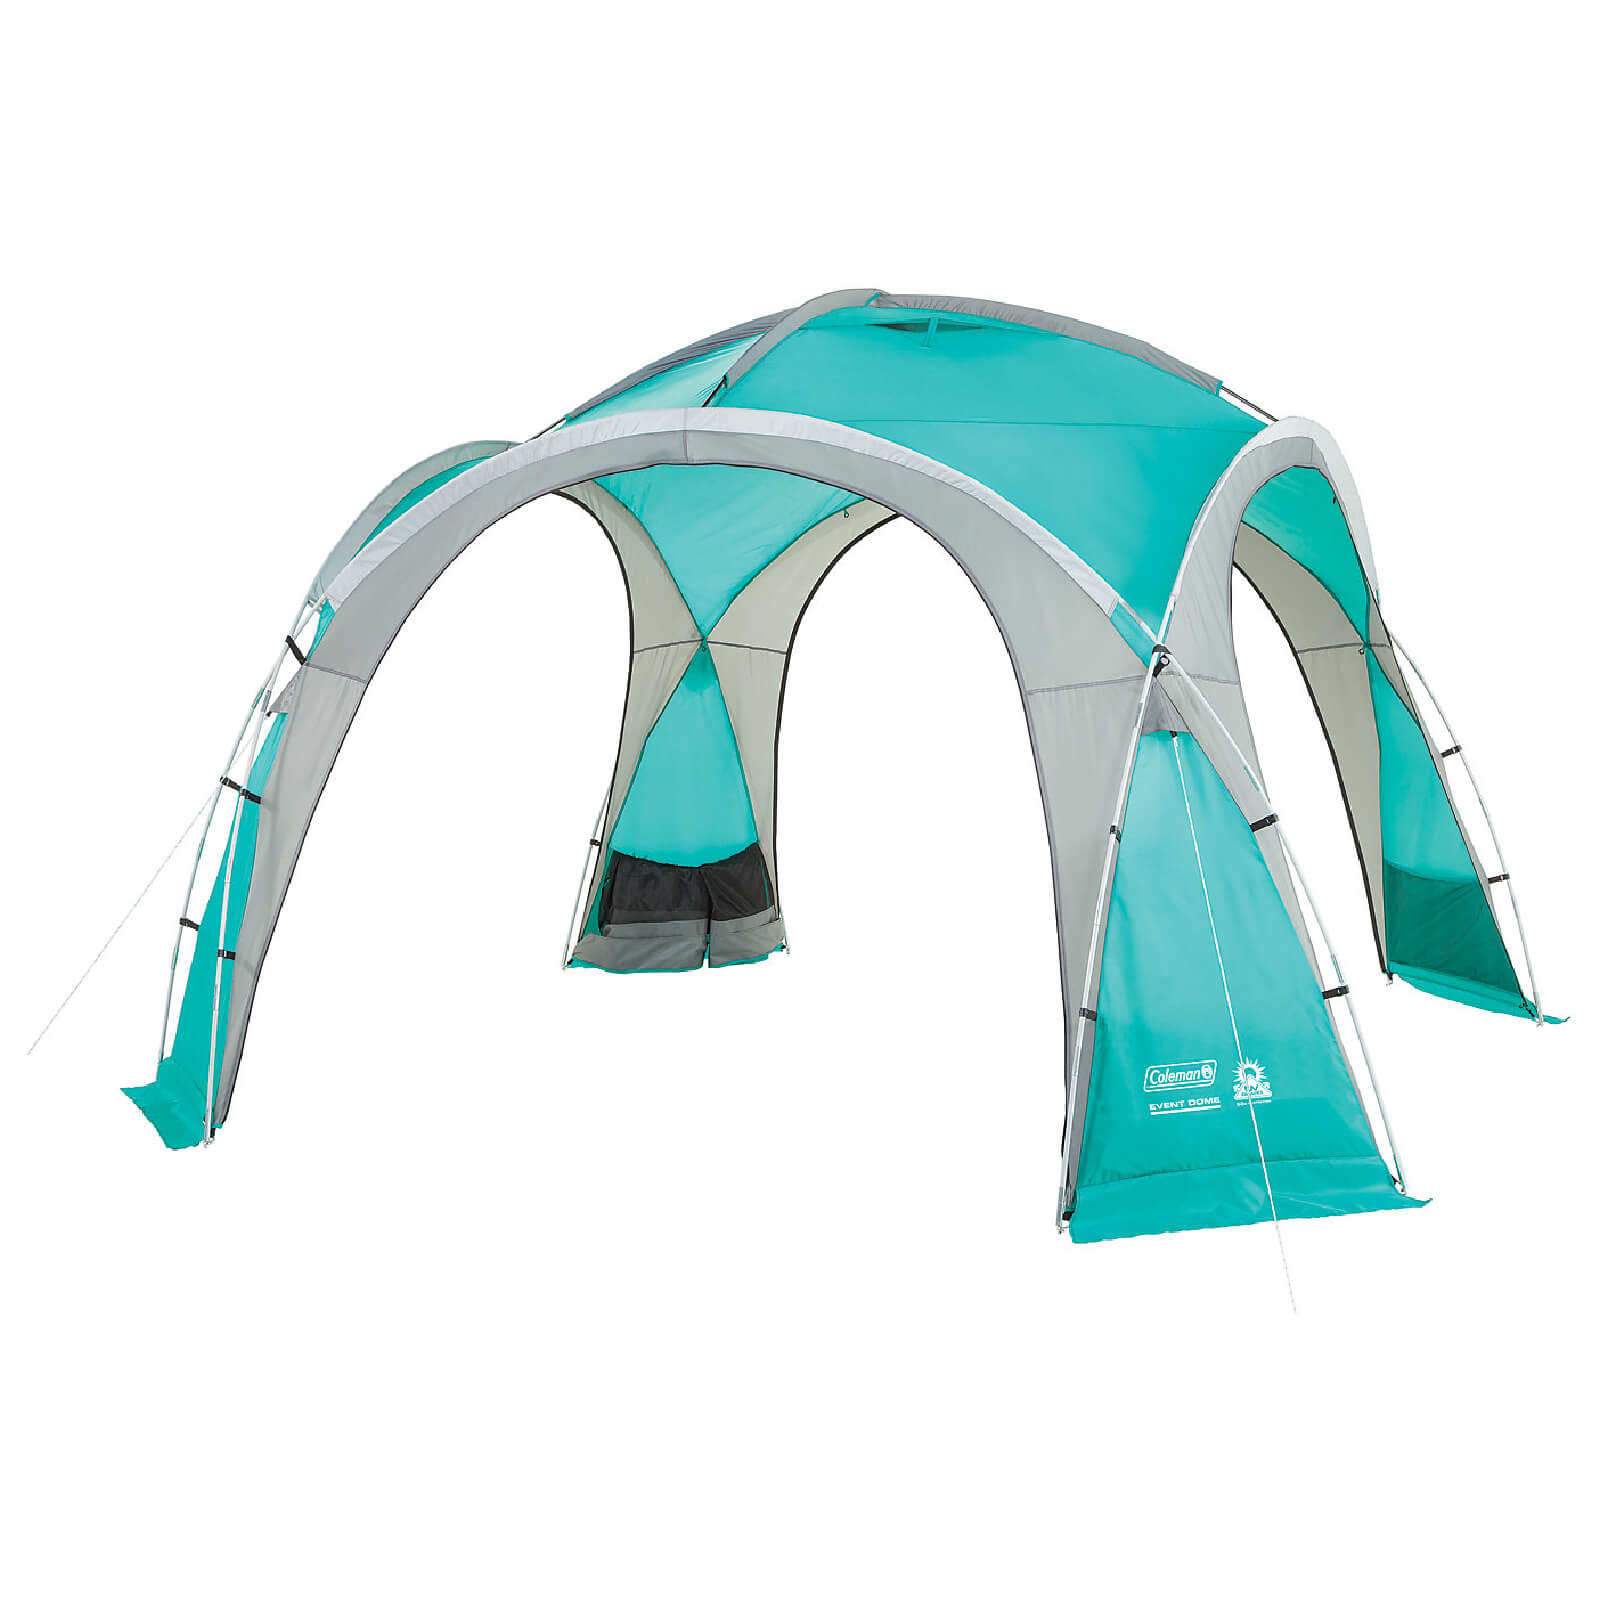 Event Shelter Coleman Event Dome With 4 Screen Walls & 2 Doors X Large (4.5x4.5m)